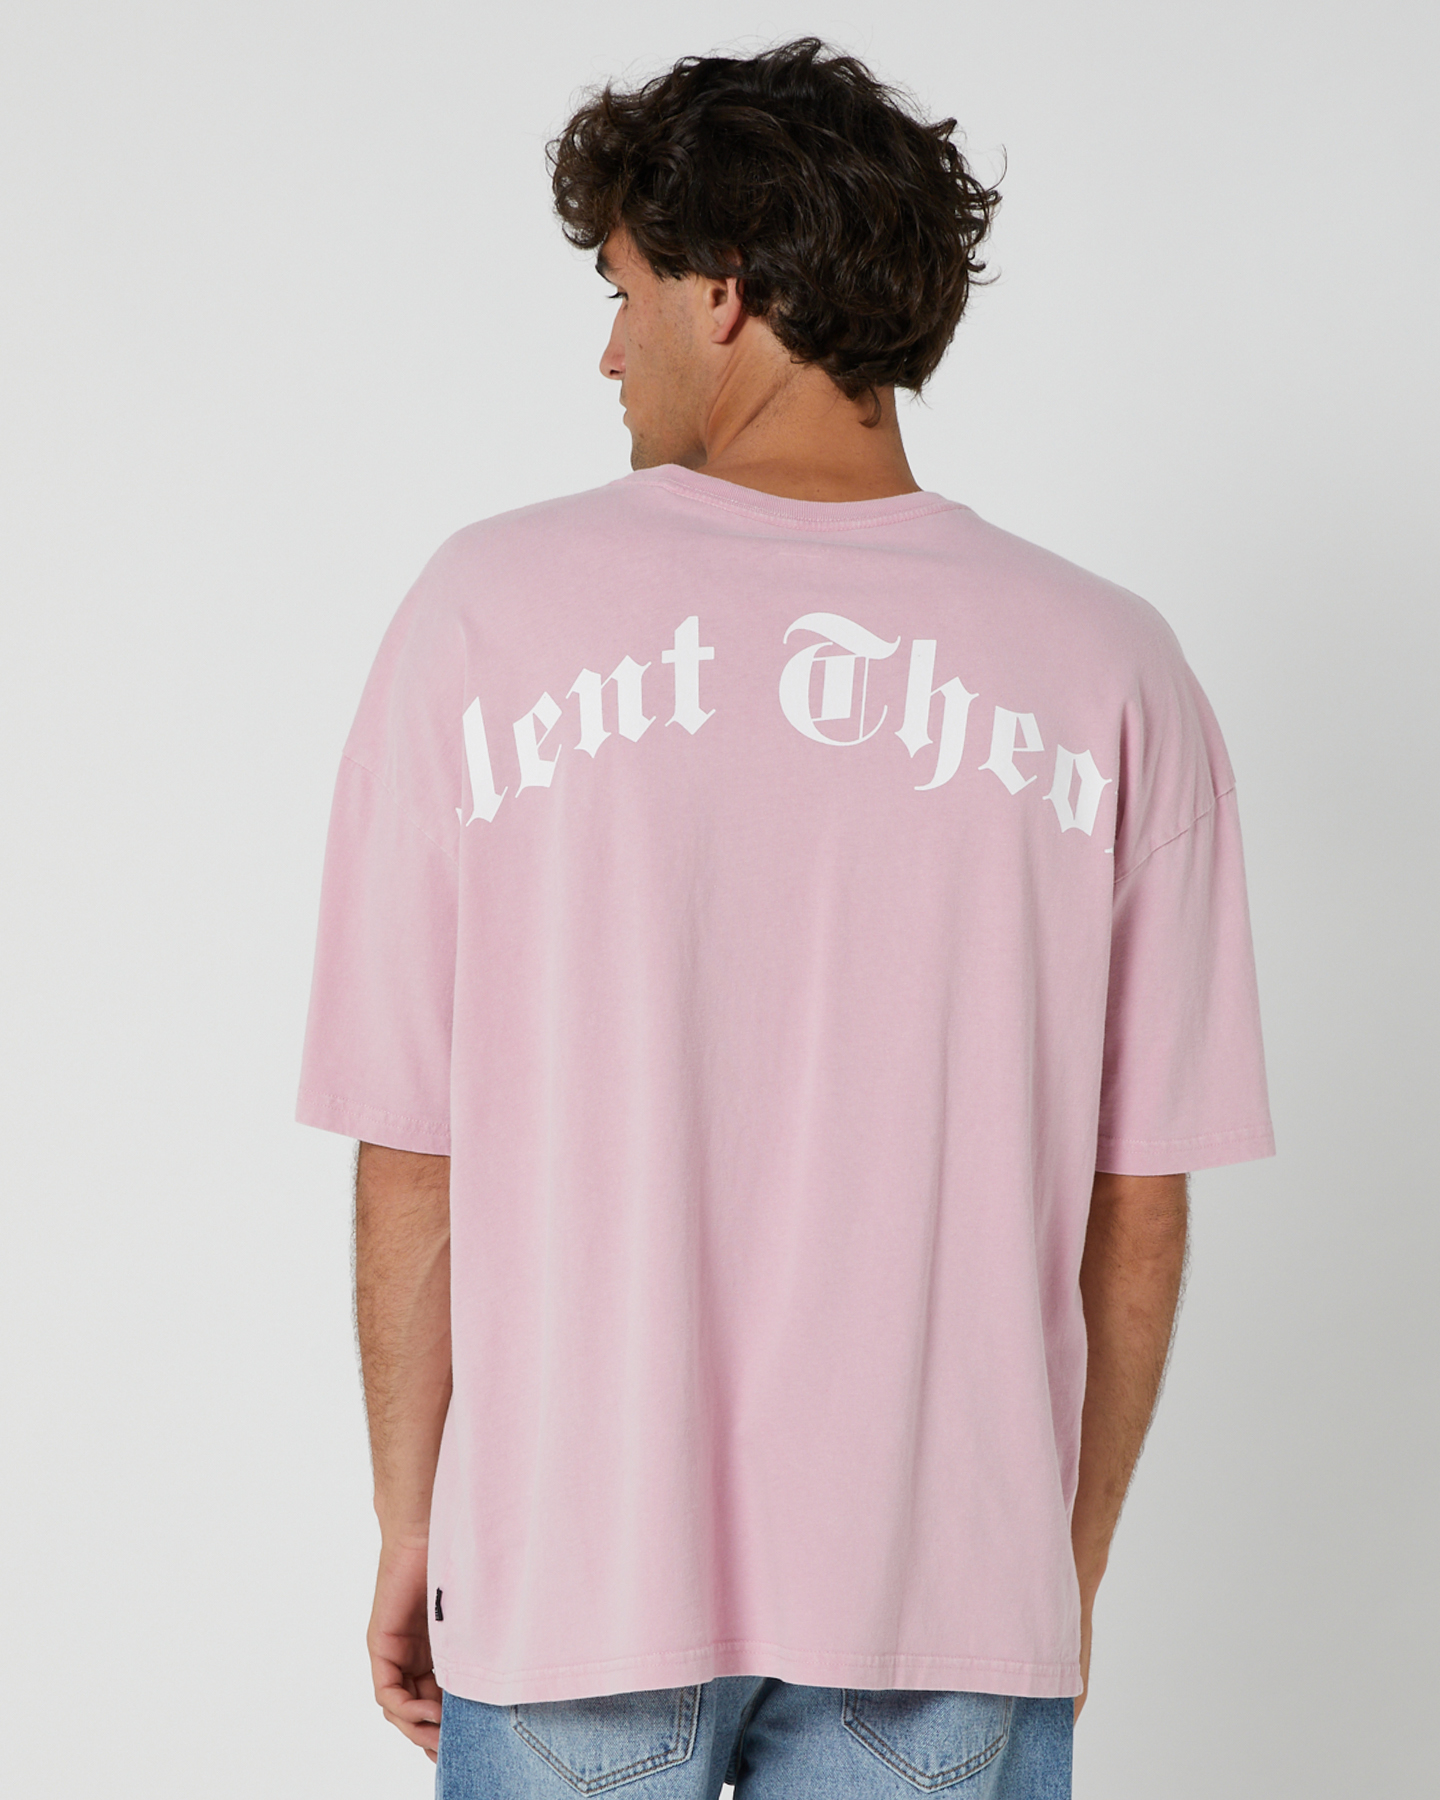 Silent Theory Machine Mens Ss Tee - Pink | SurfStitch